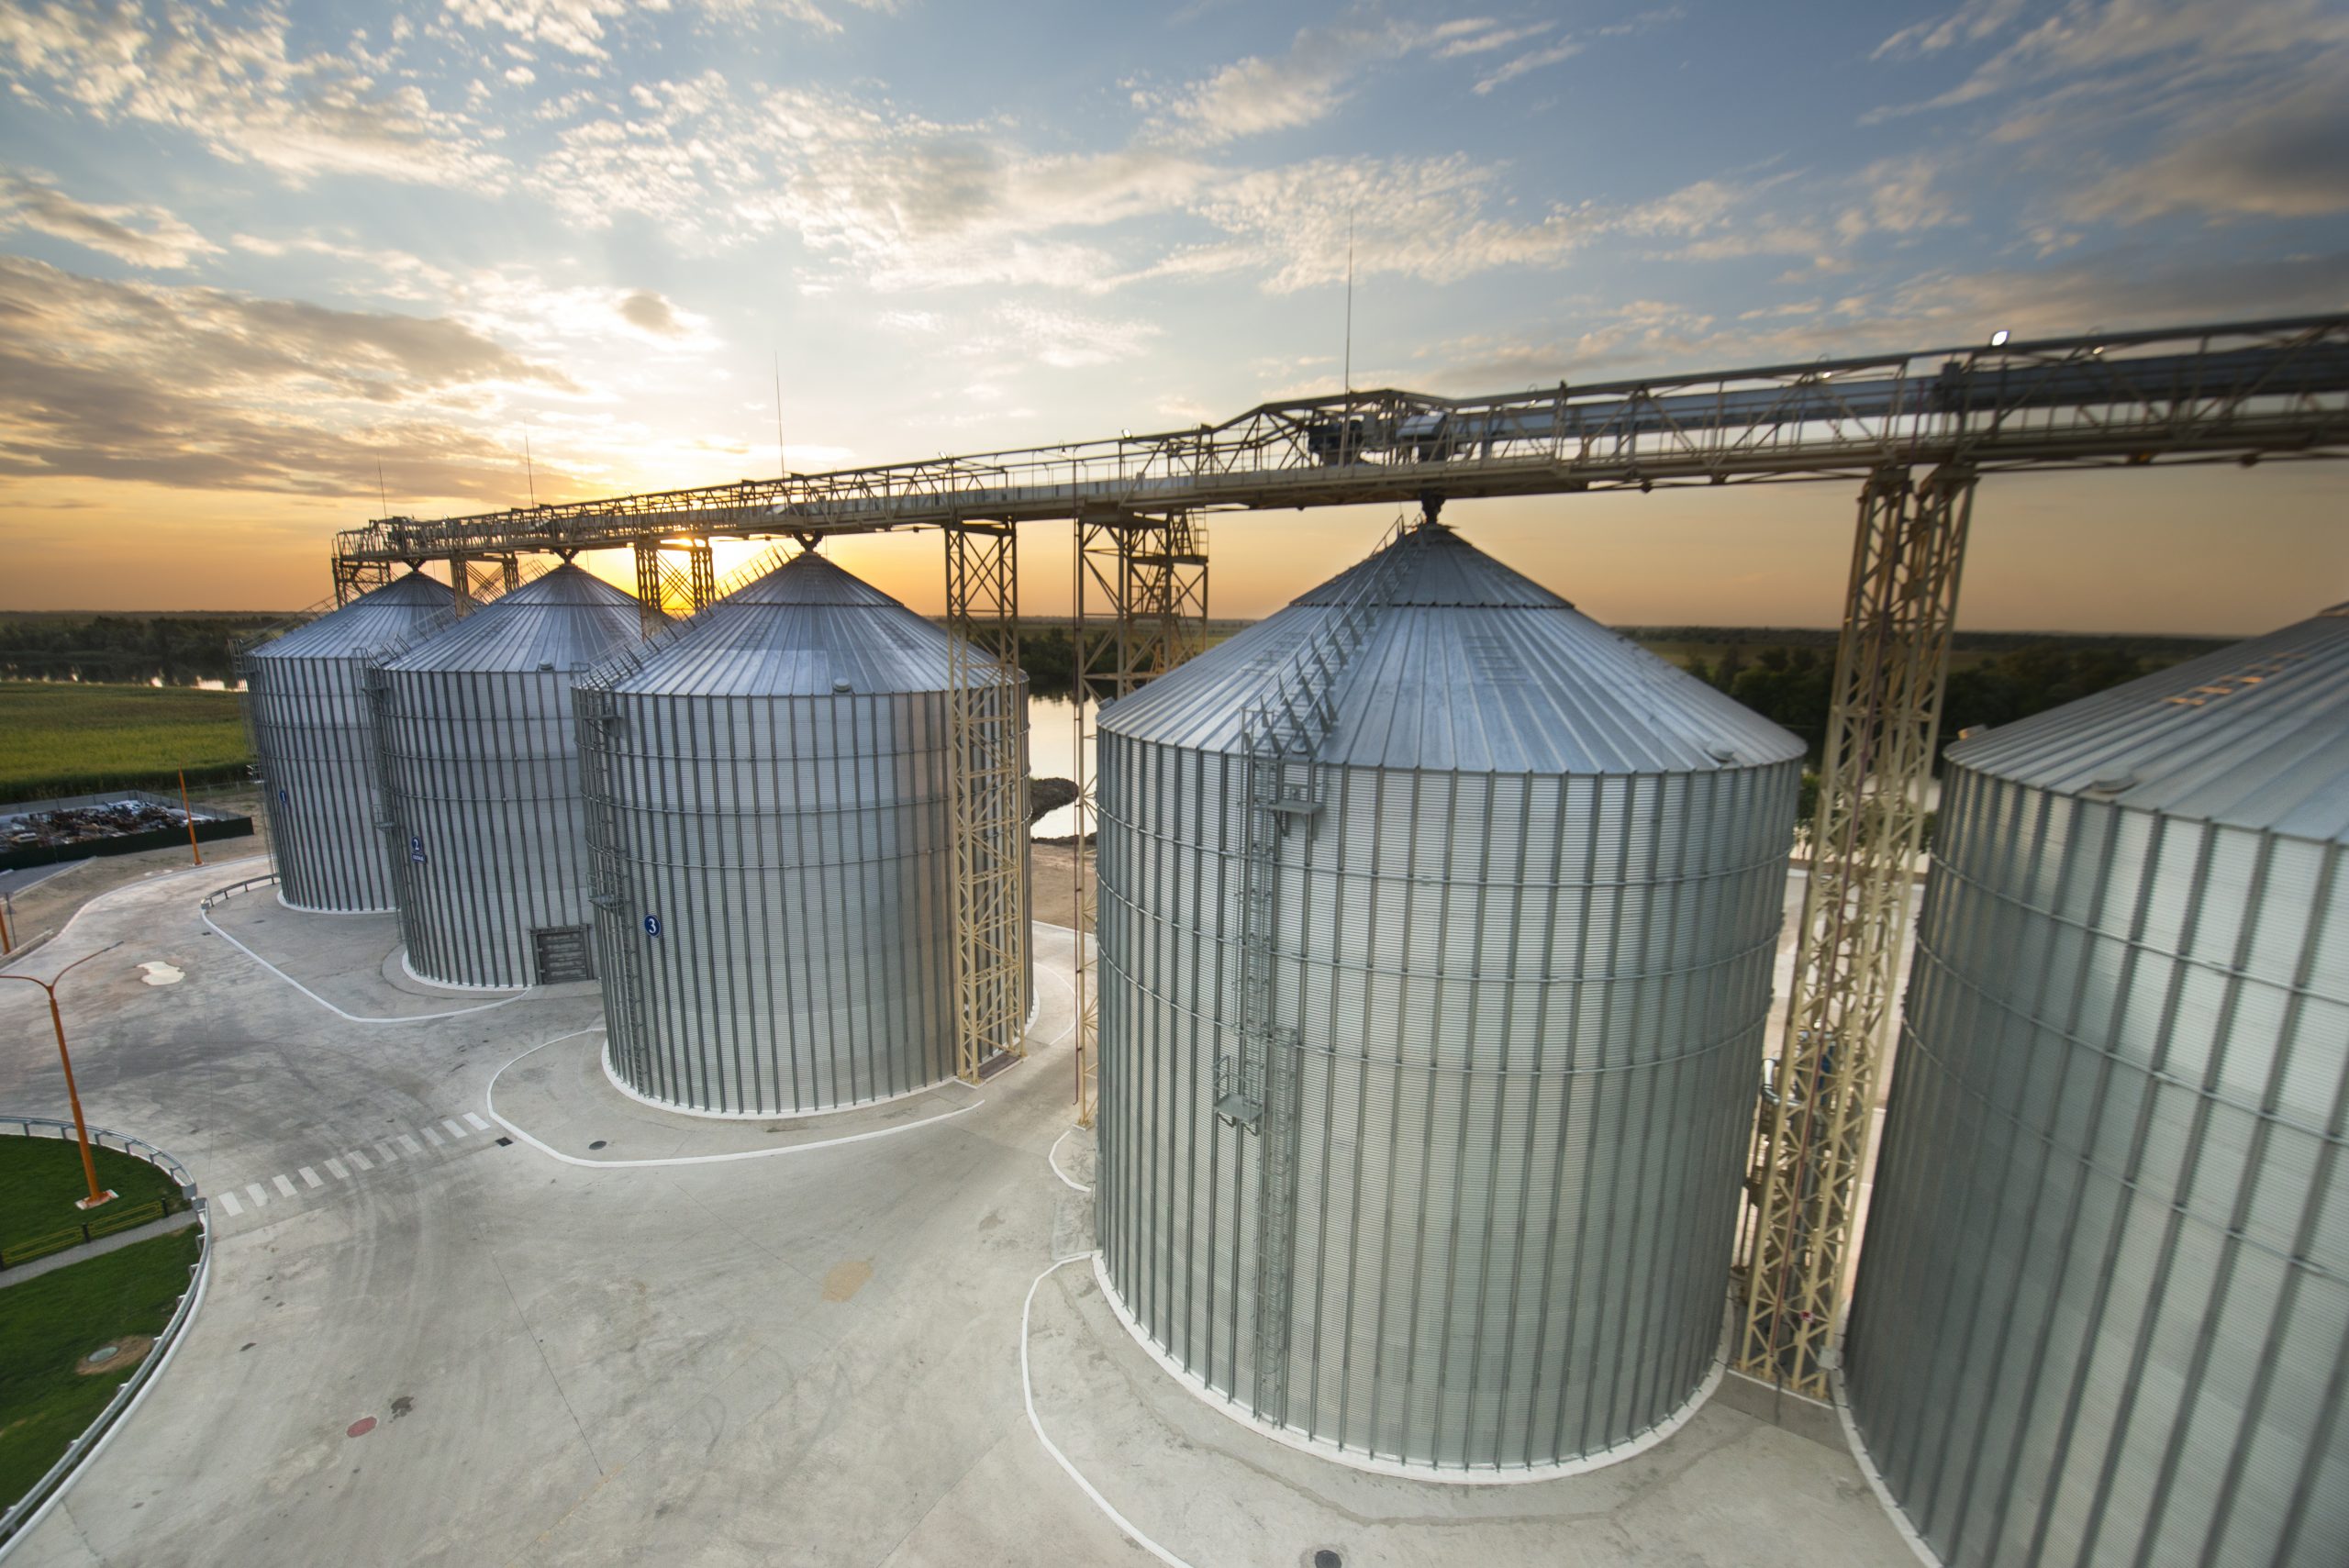 New rules for grain exports